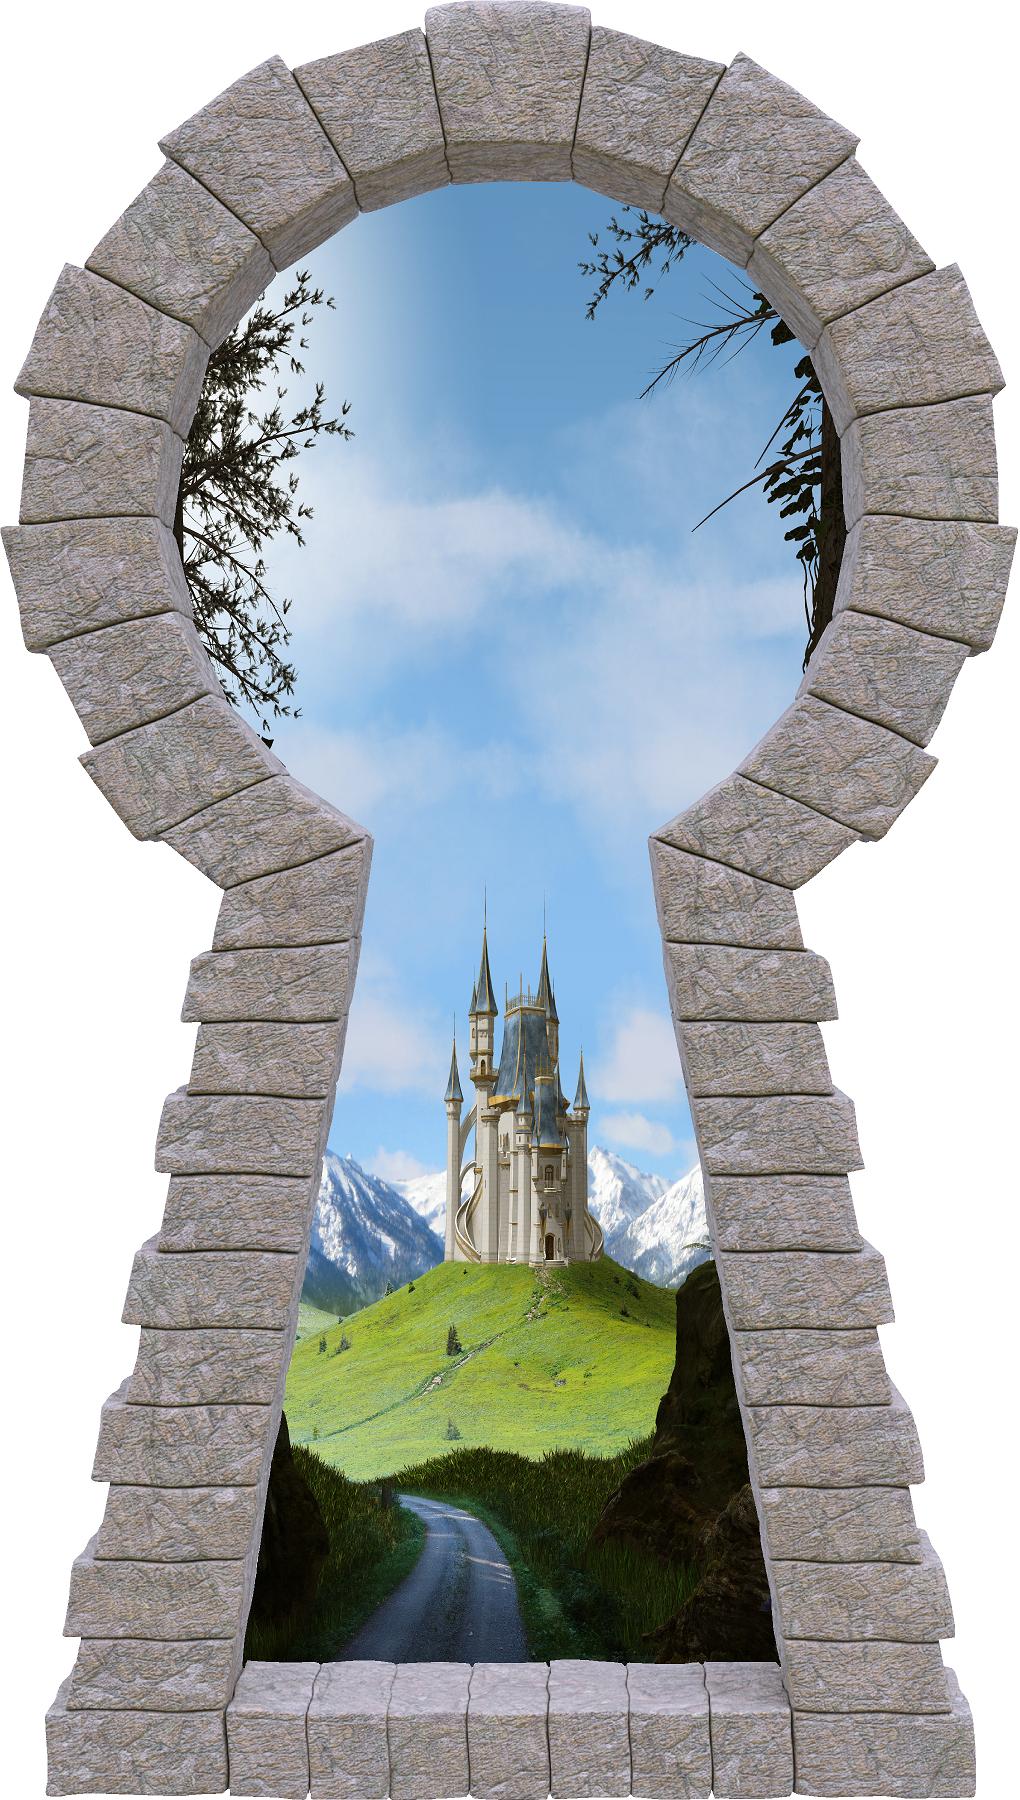 3D Stone Keyhole Wall Decal Castle View from Forest Fairy Tale Princess Brick Window Removable Fabric Vinyl Wall Sticker | DecalBaby